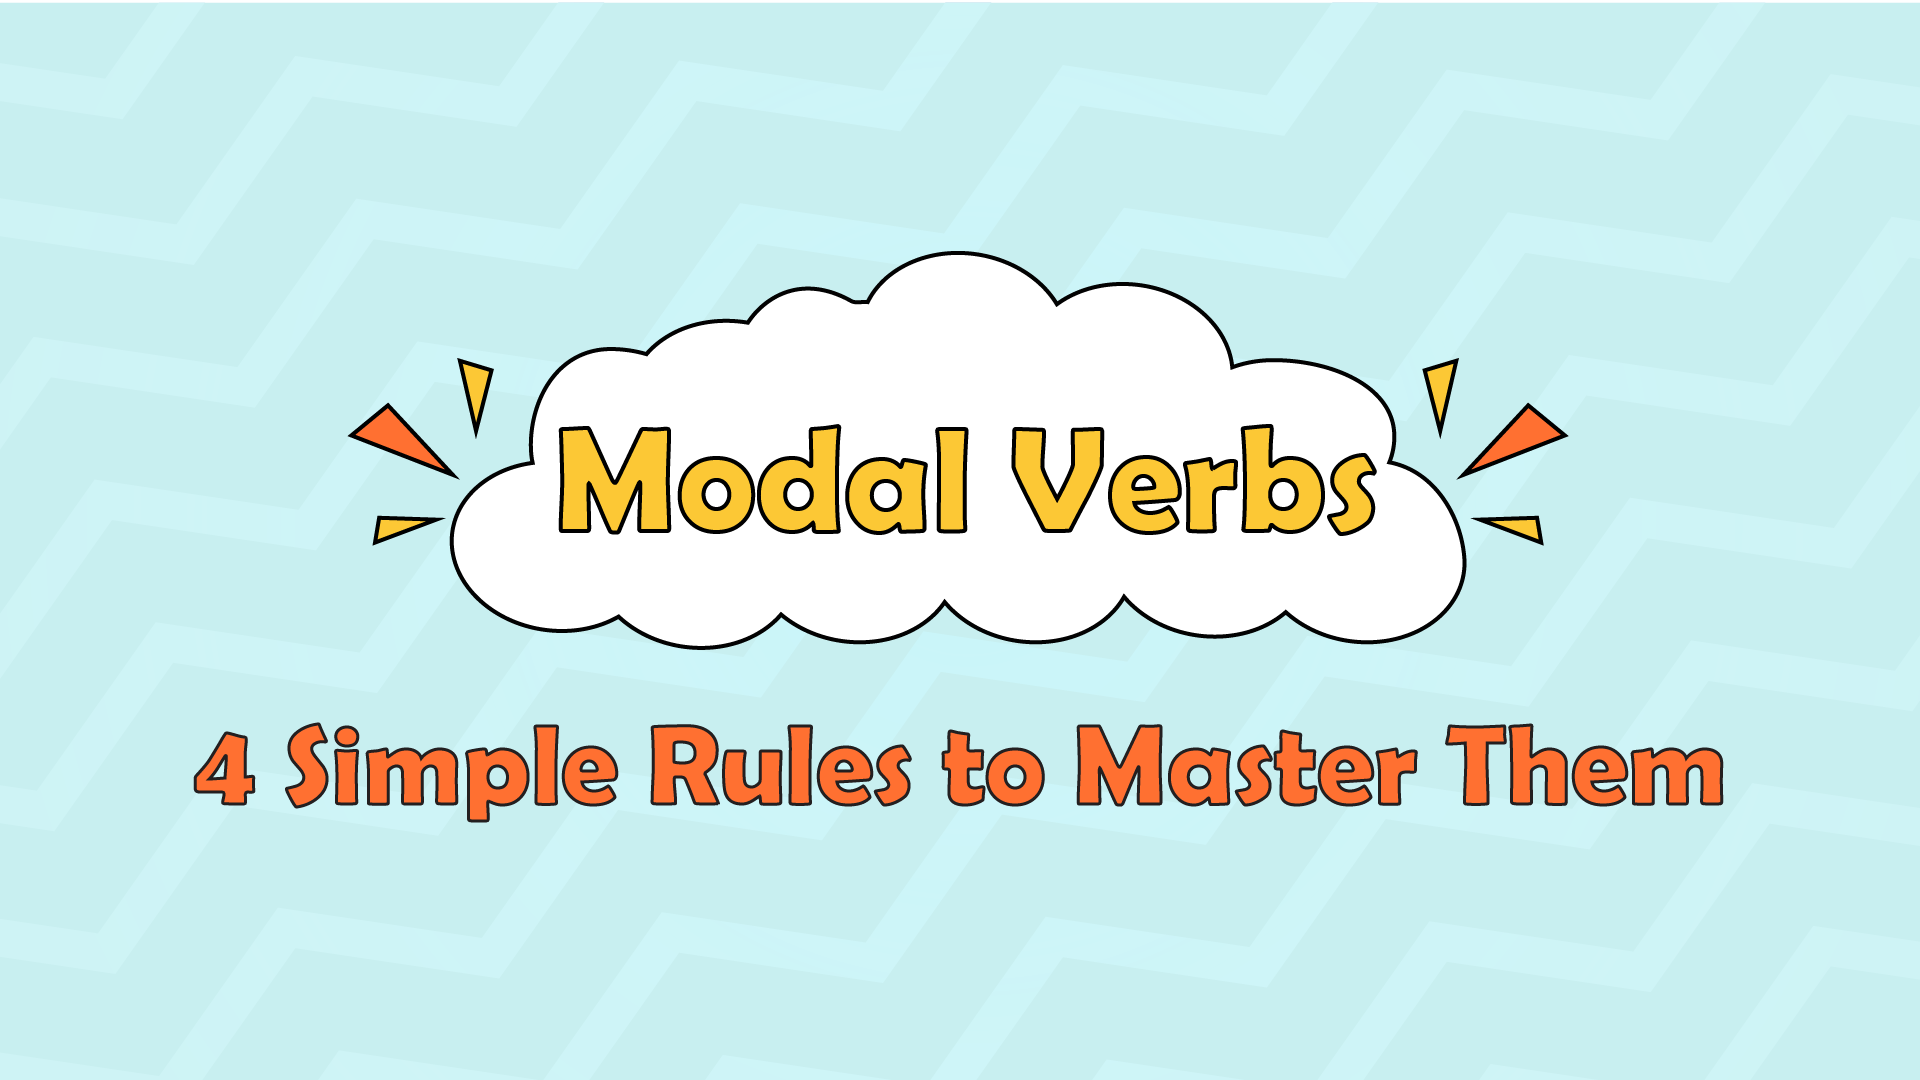 Modal Verbs; 4 Simple Rules to Master Them